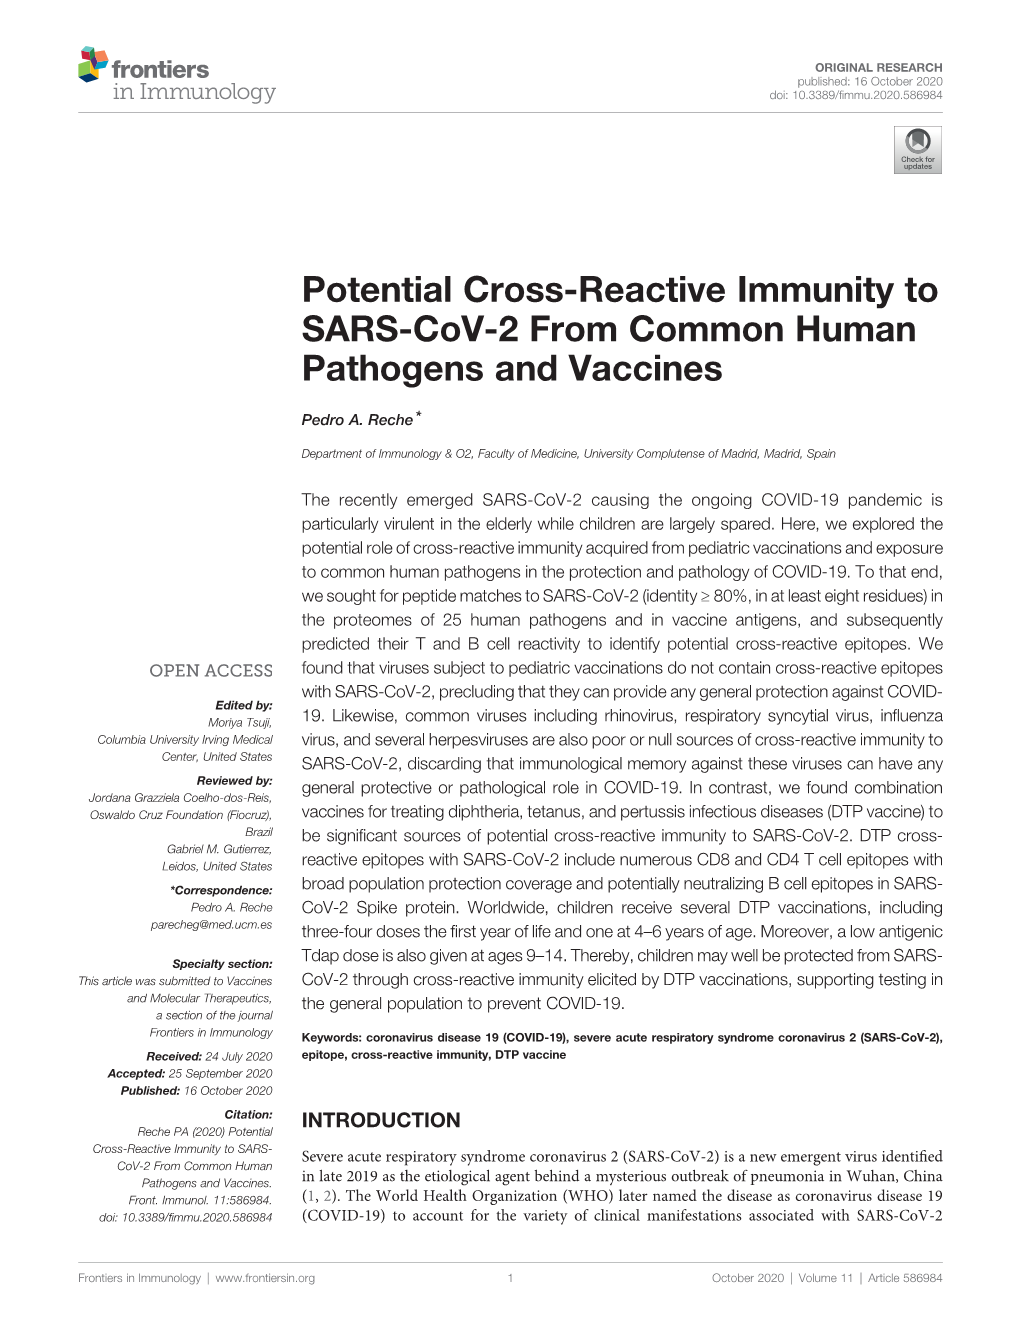 Potential Cross-Reactive Immunity to SARS-Cov-2 from Common Human Pathogens and Vaccines